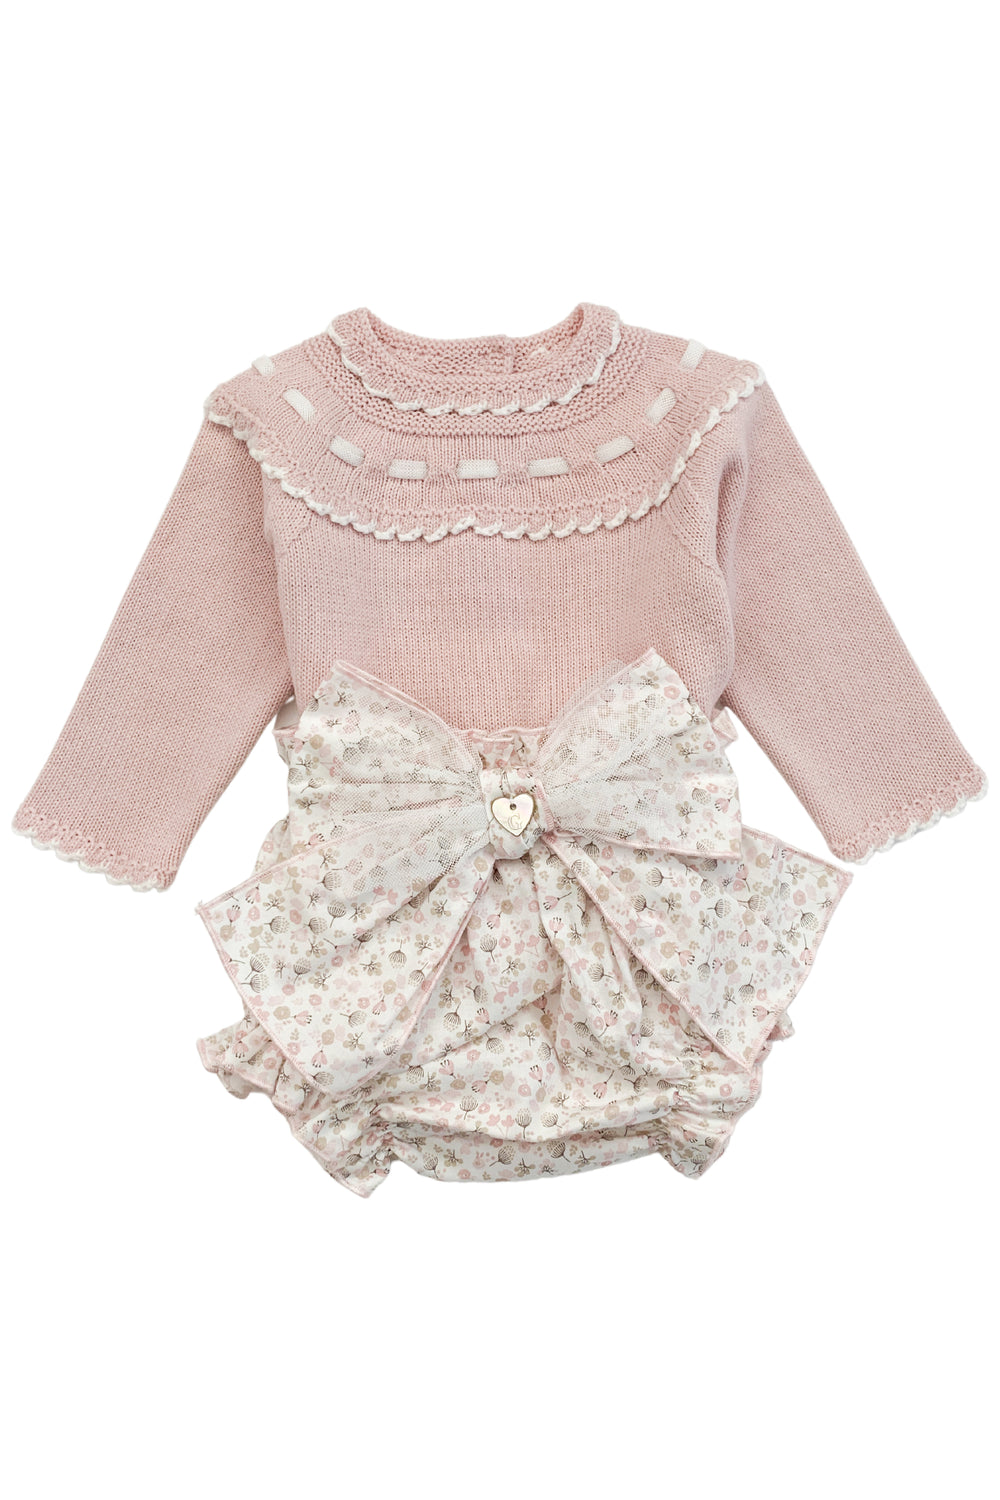 Granlei "Gracie" Dusky Pink Knit Top & Floral Bloomers | Millie and John